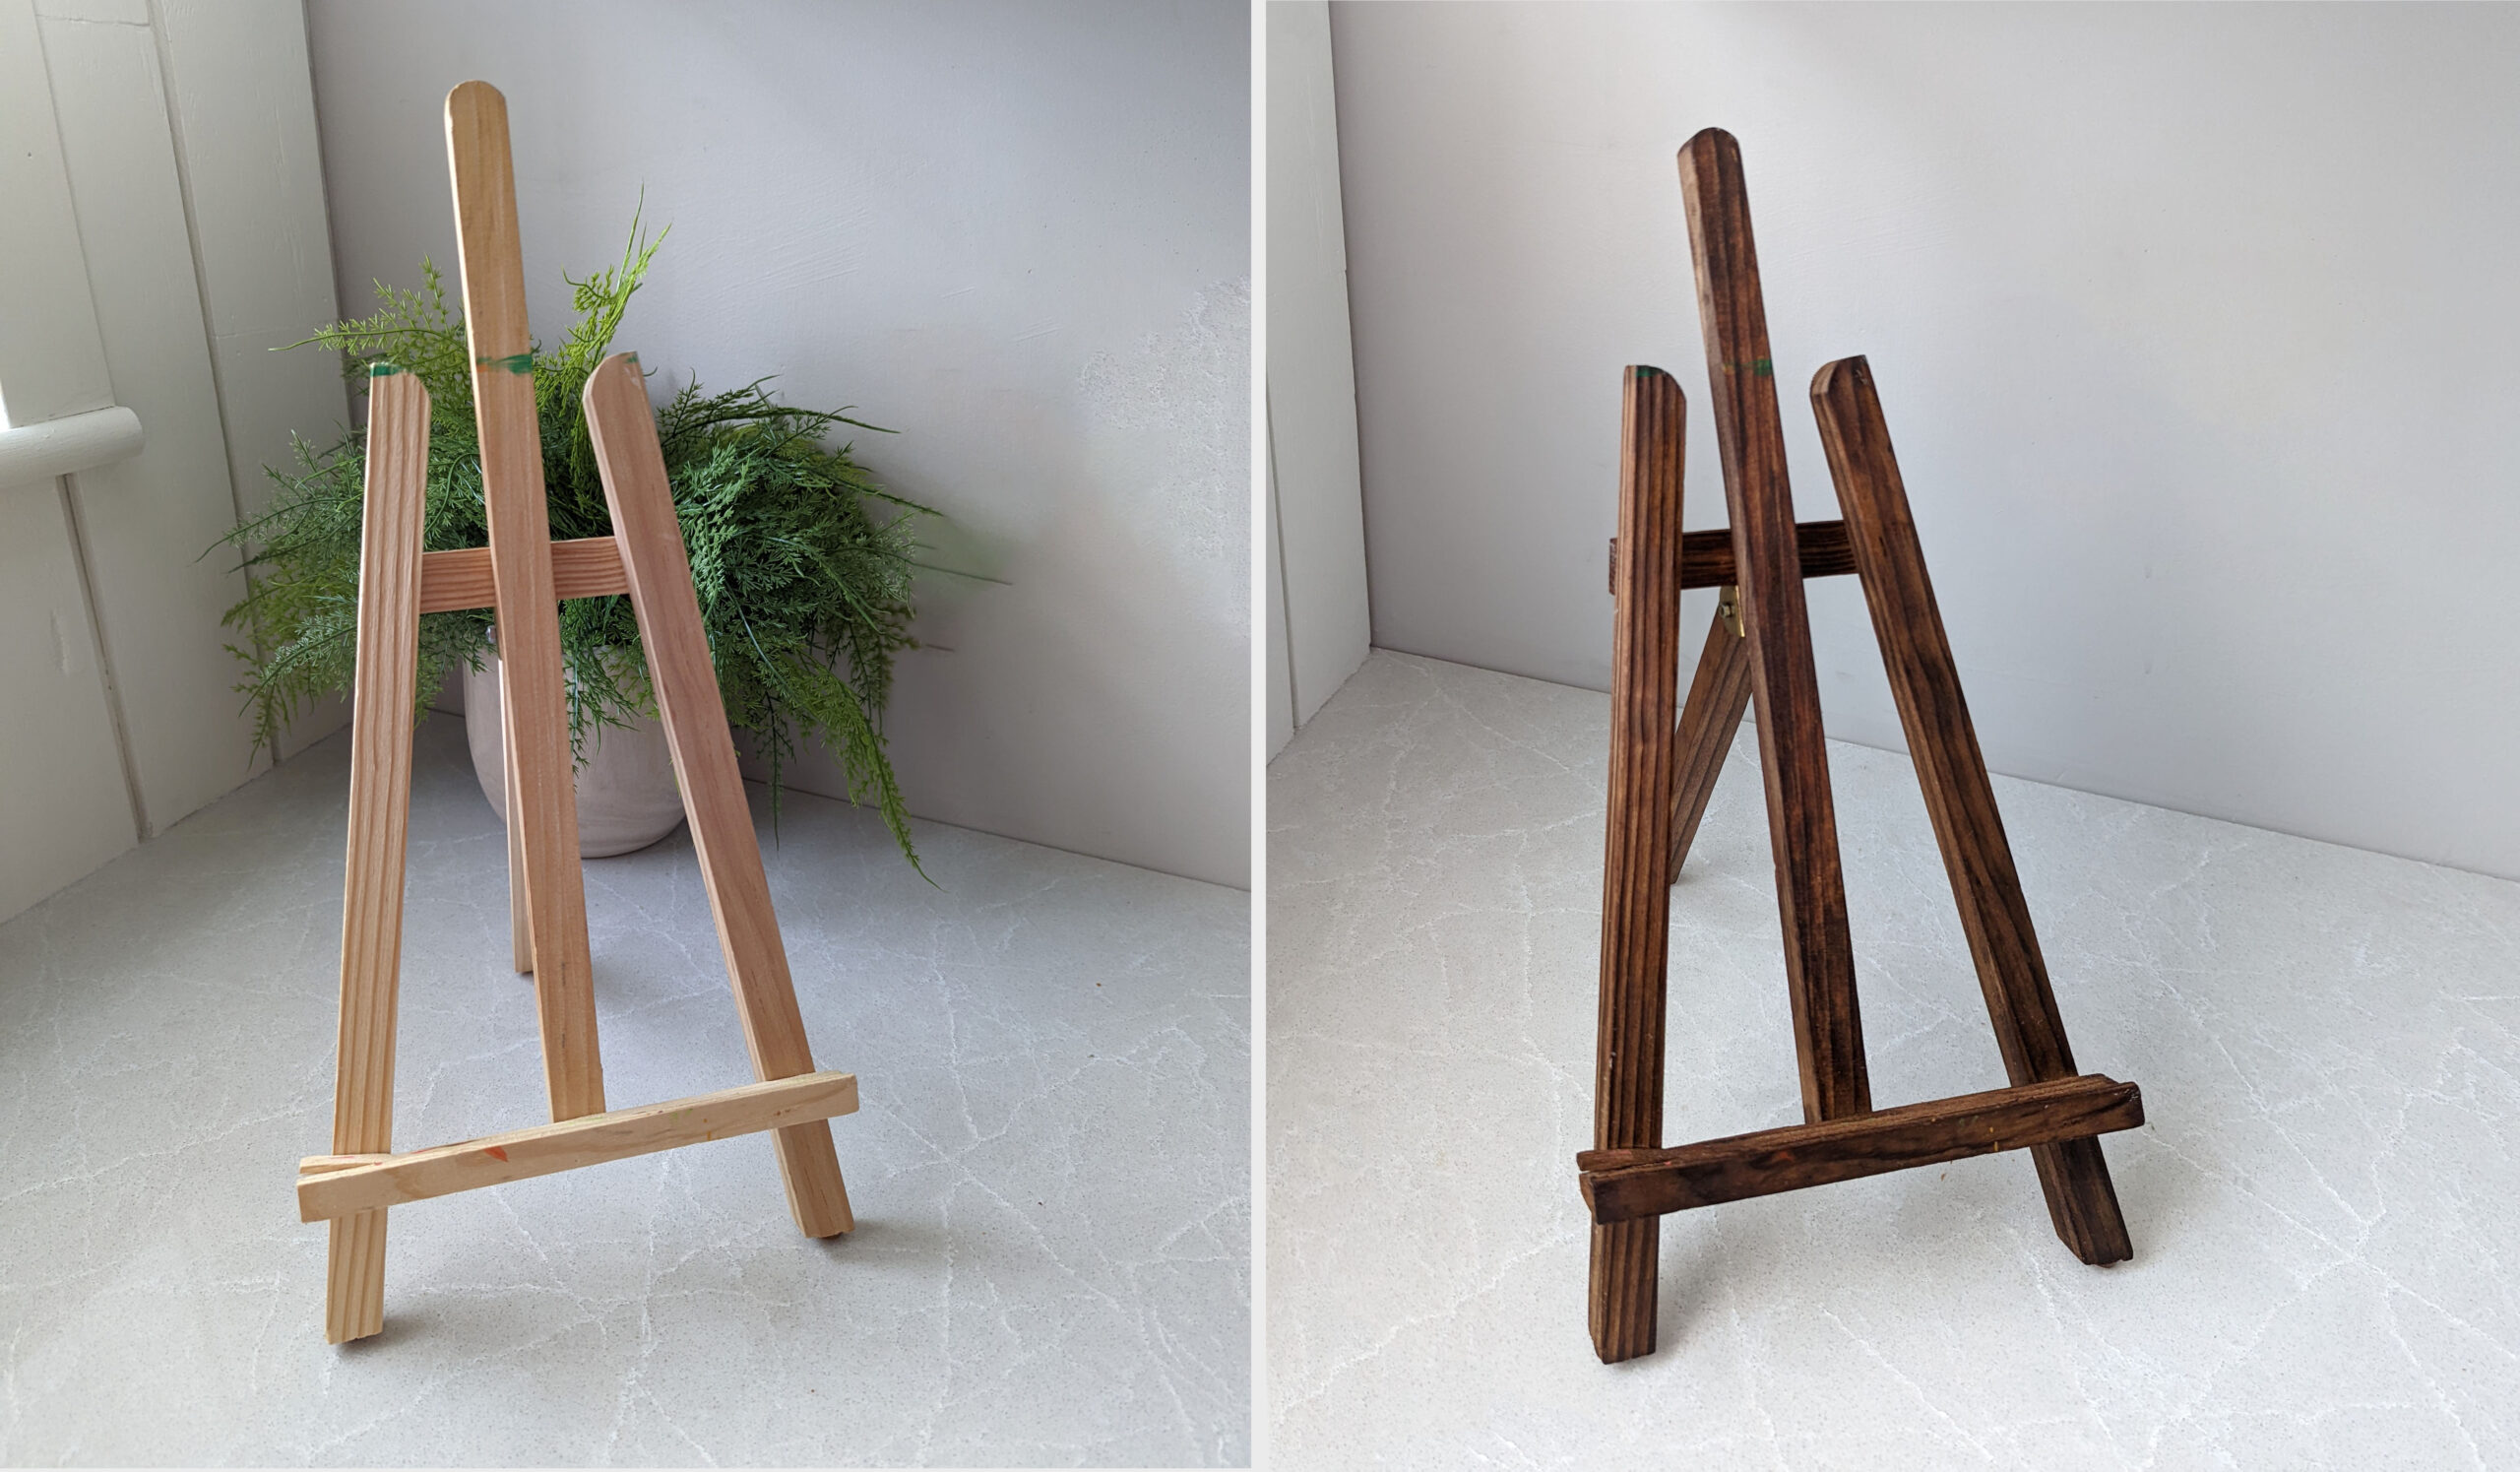 A dollar store wood easel before and after staining with vinegar based wood stain.